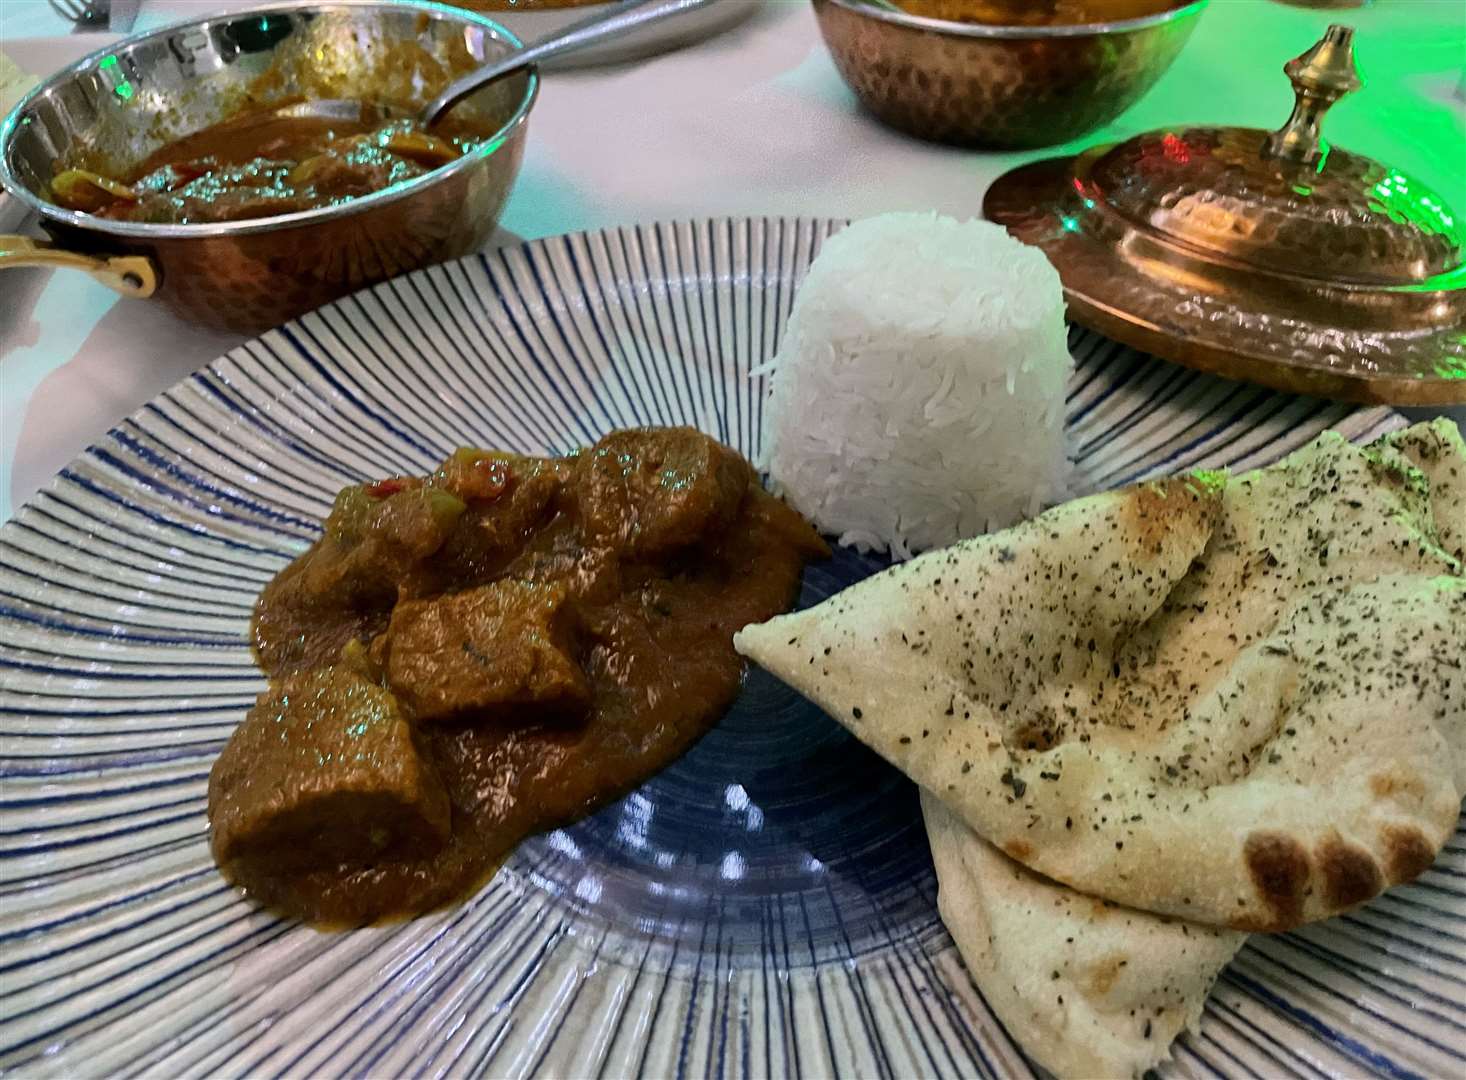 The Jalfrezi-style lamb came with a naan and rice